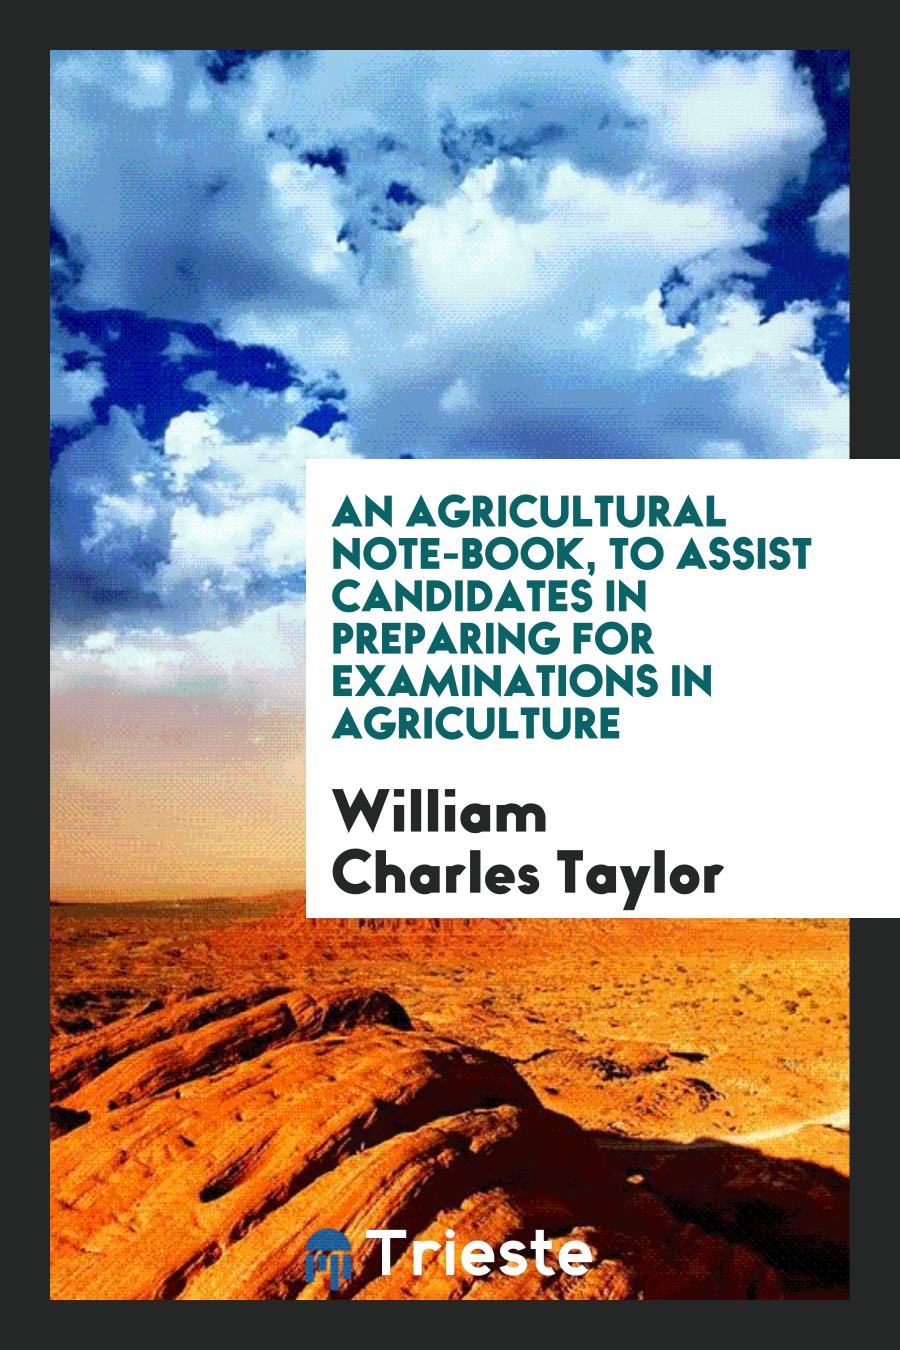 An Agricultural Note-Book, to Assist Candidates in Preparing for Examinations in Agriculture